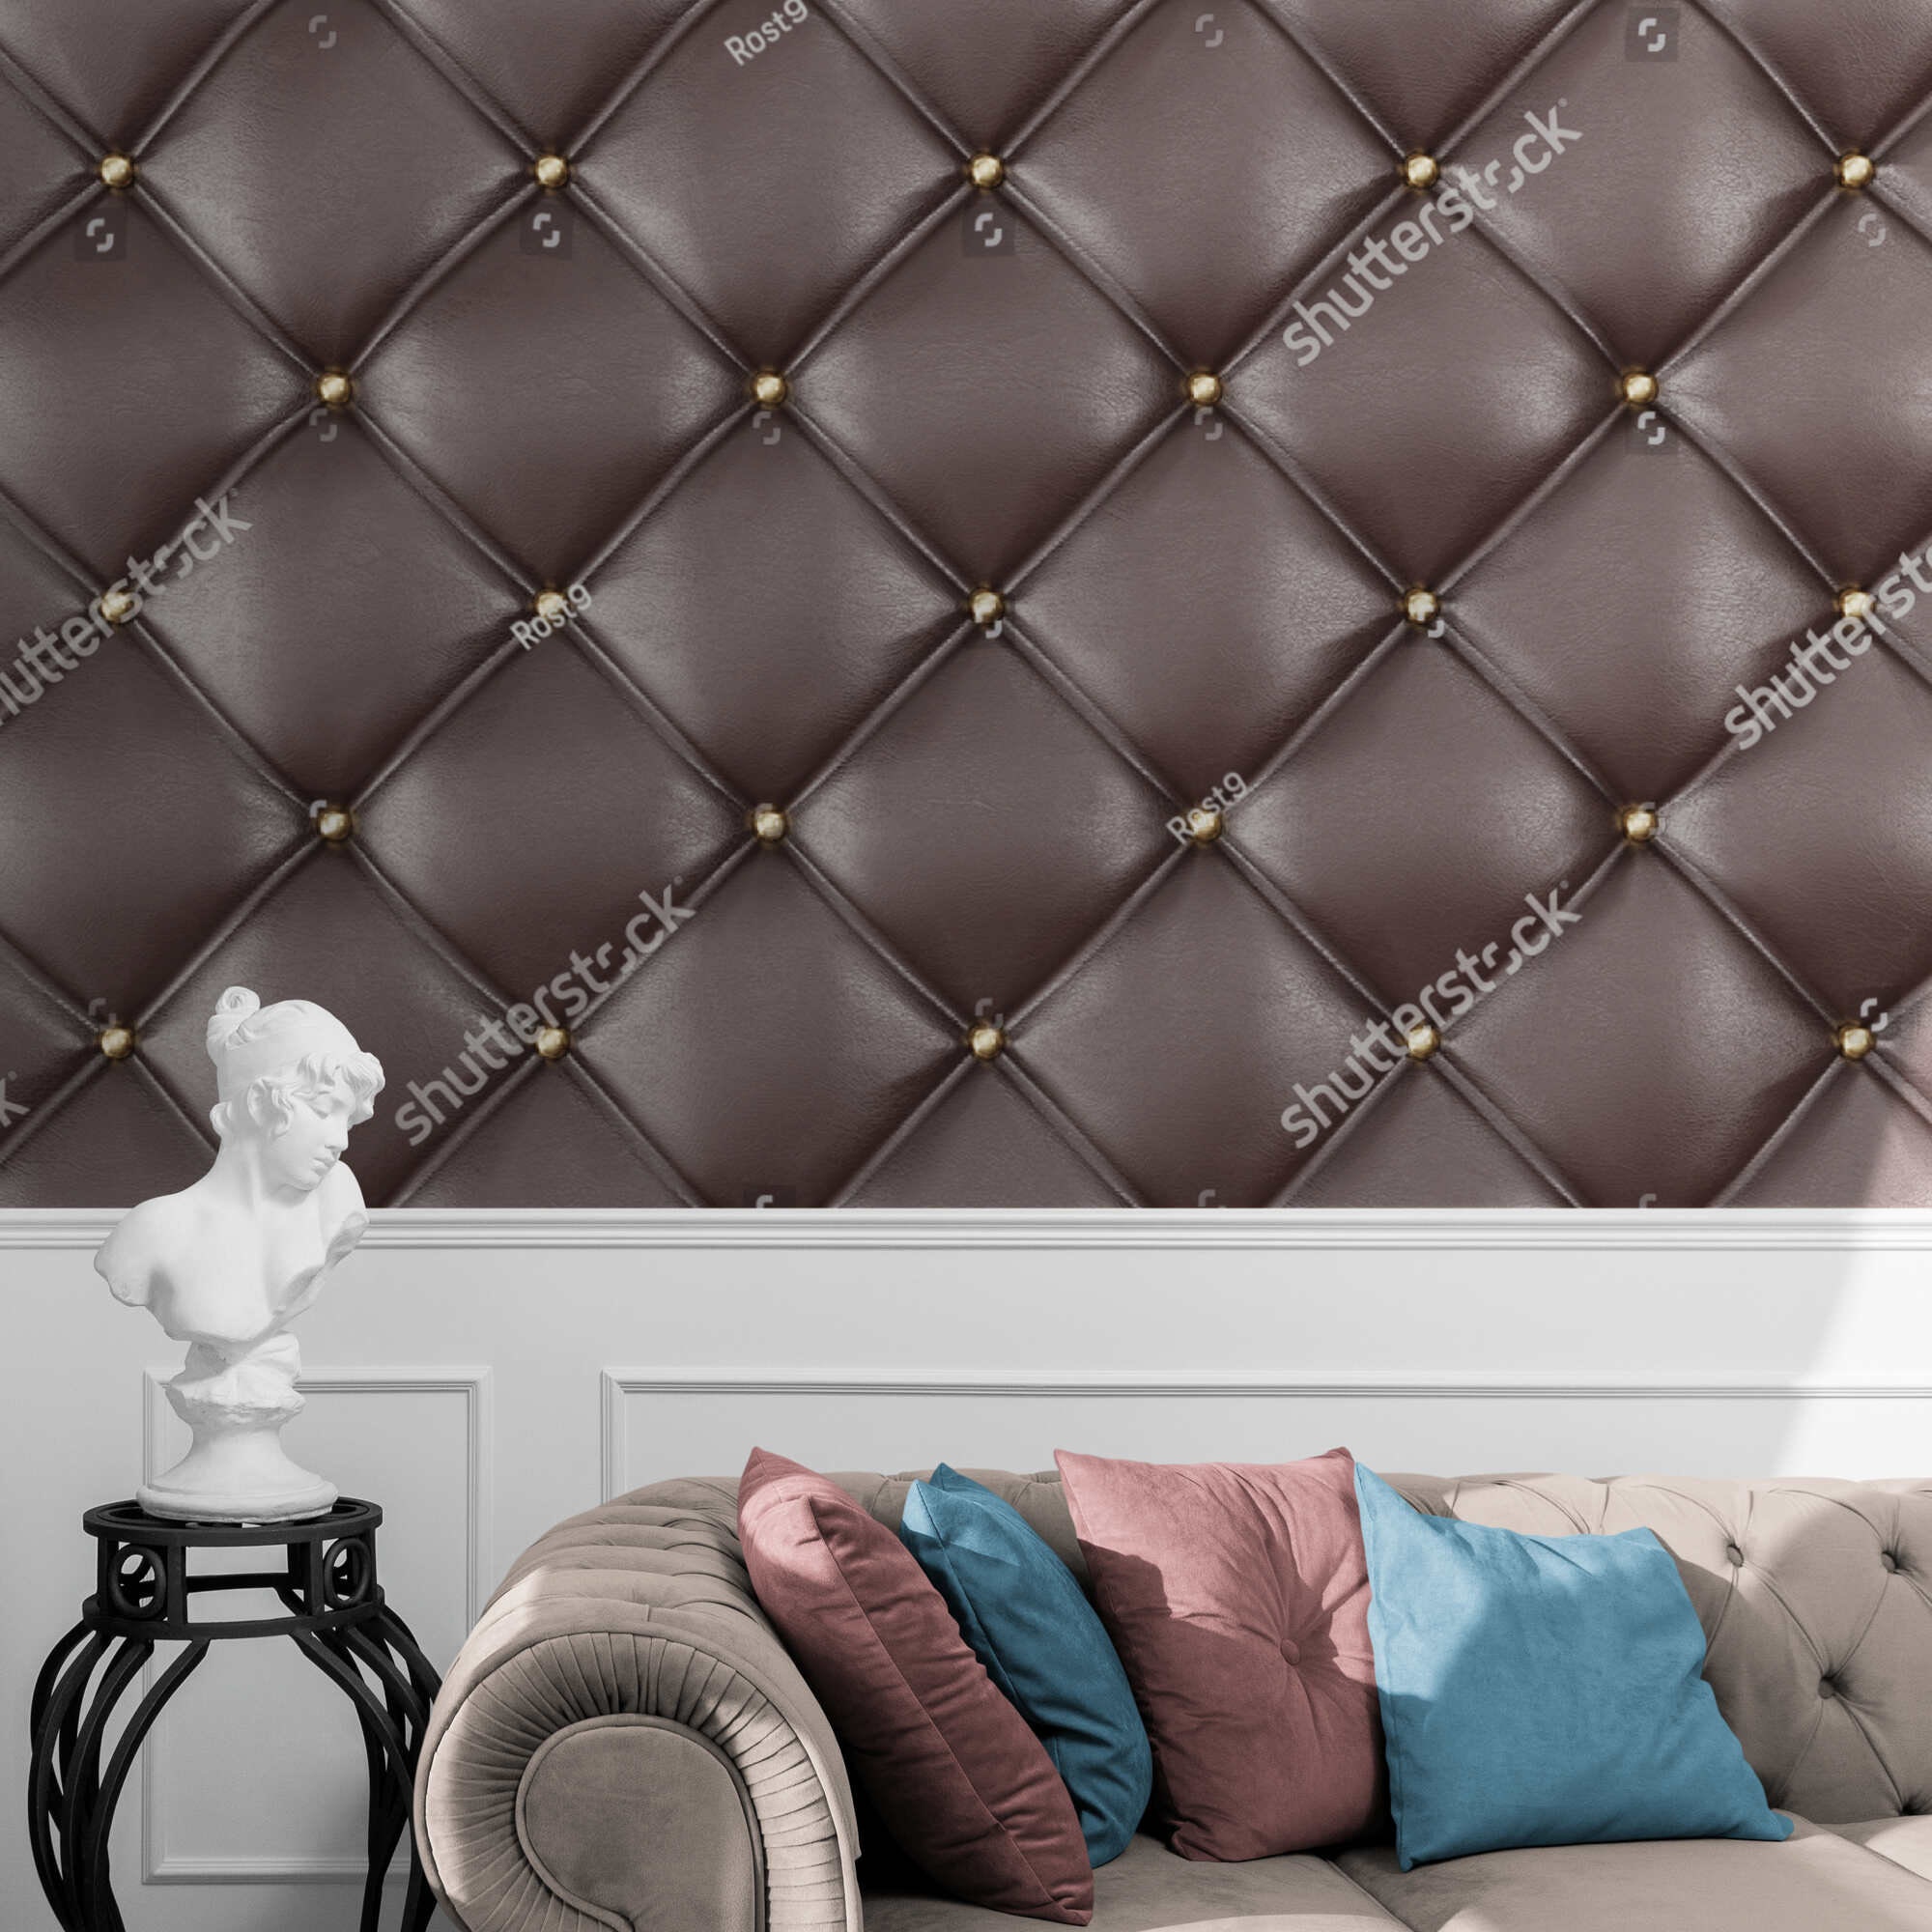 Leather Texture Fabric, Wallpaper and Home Decor